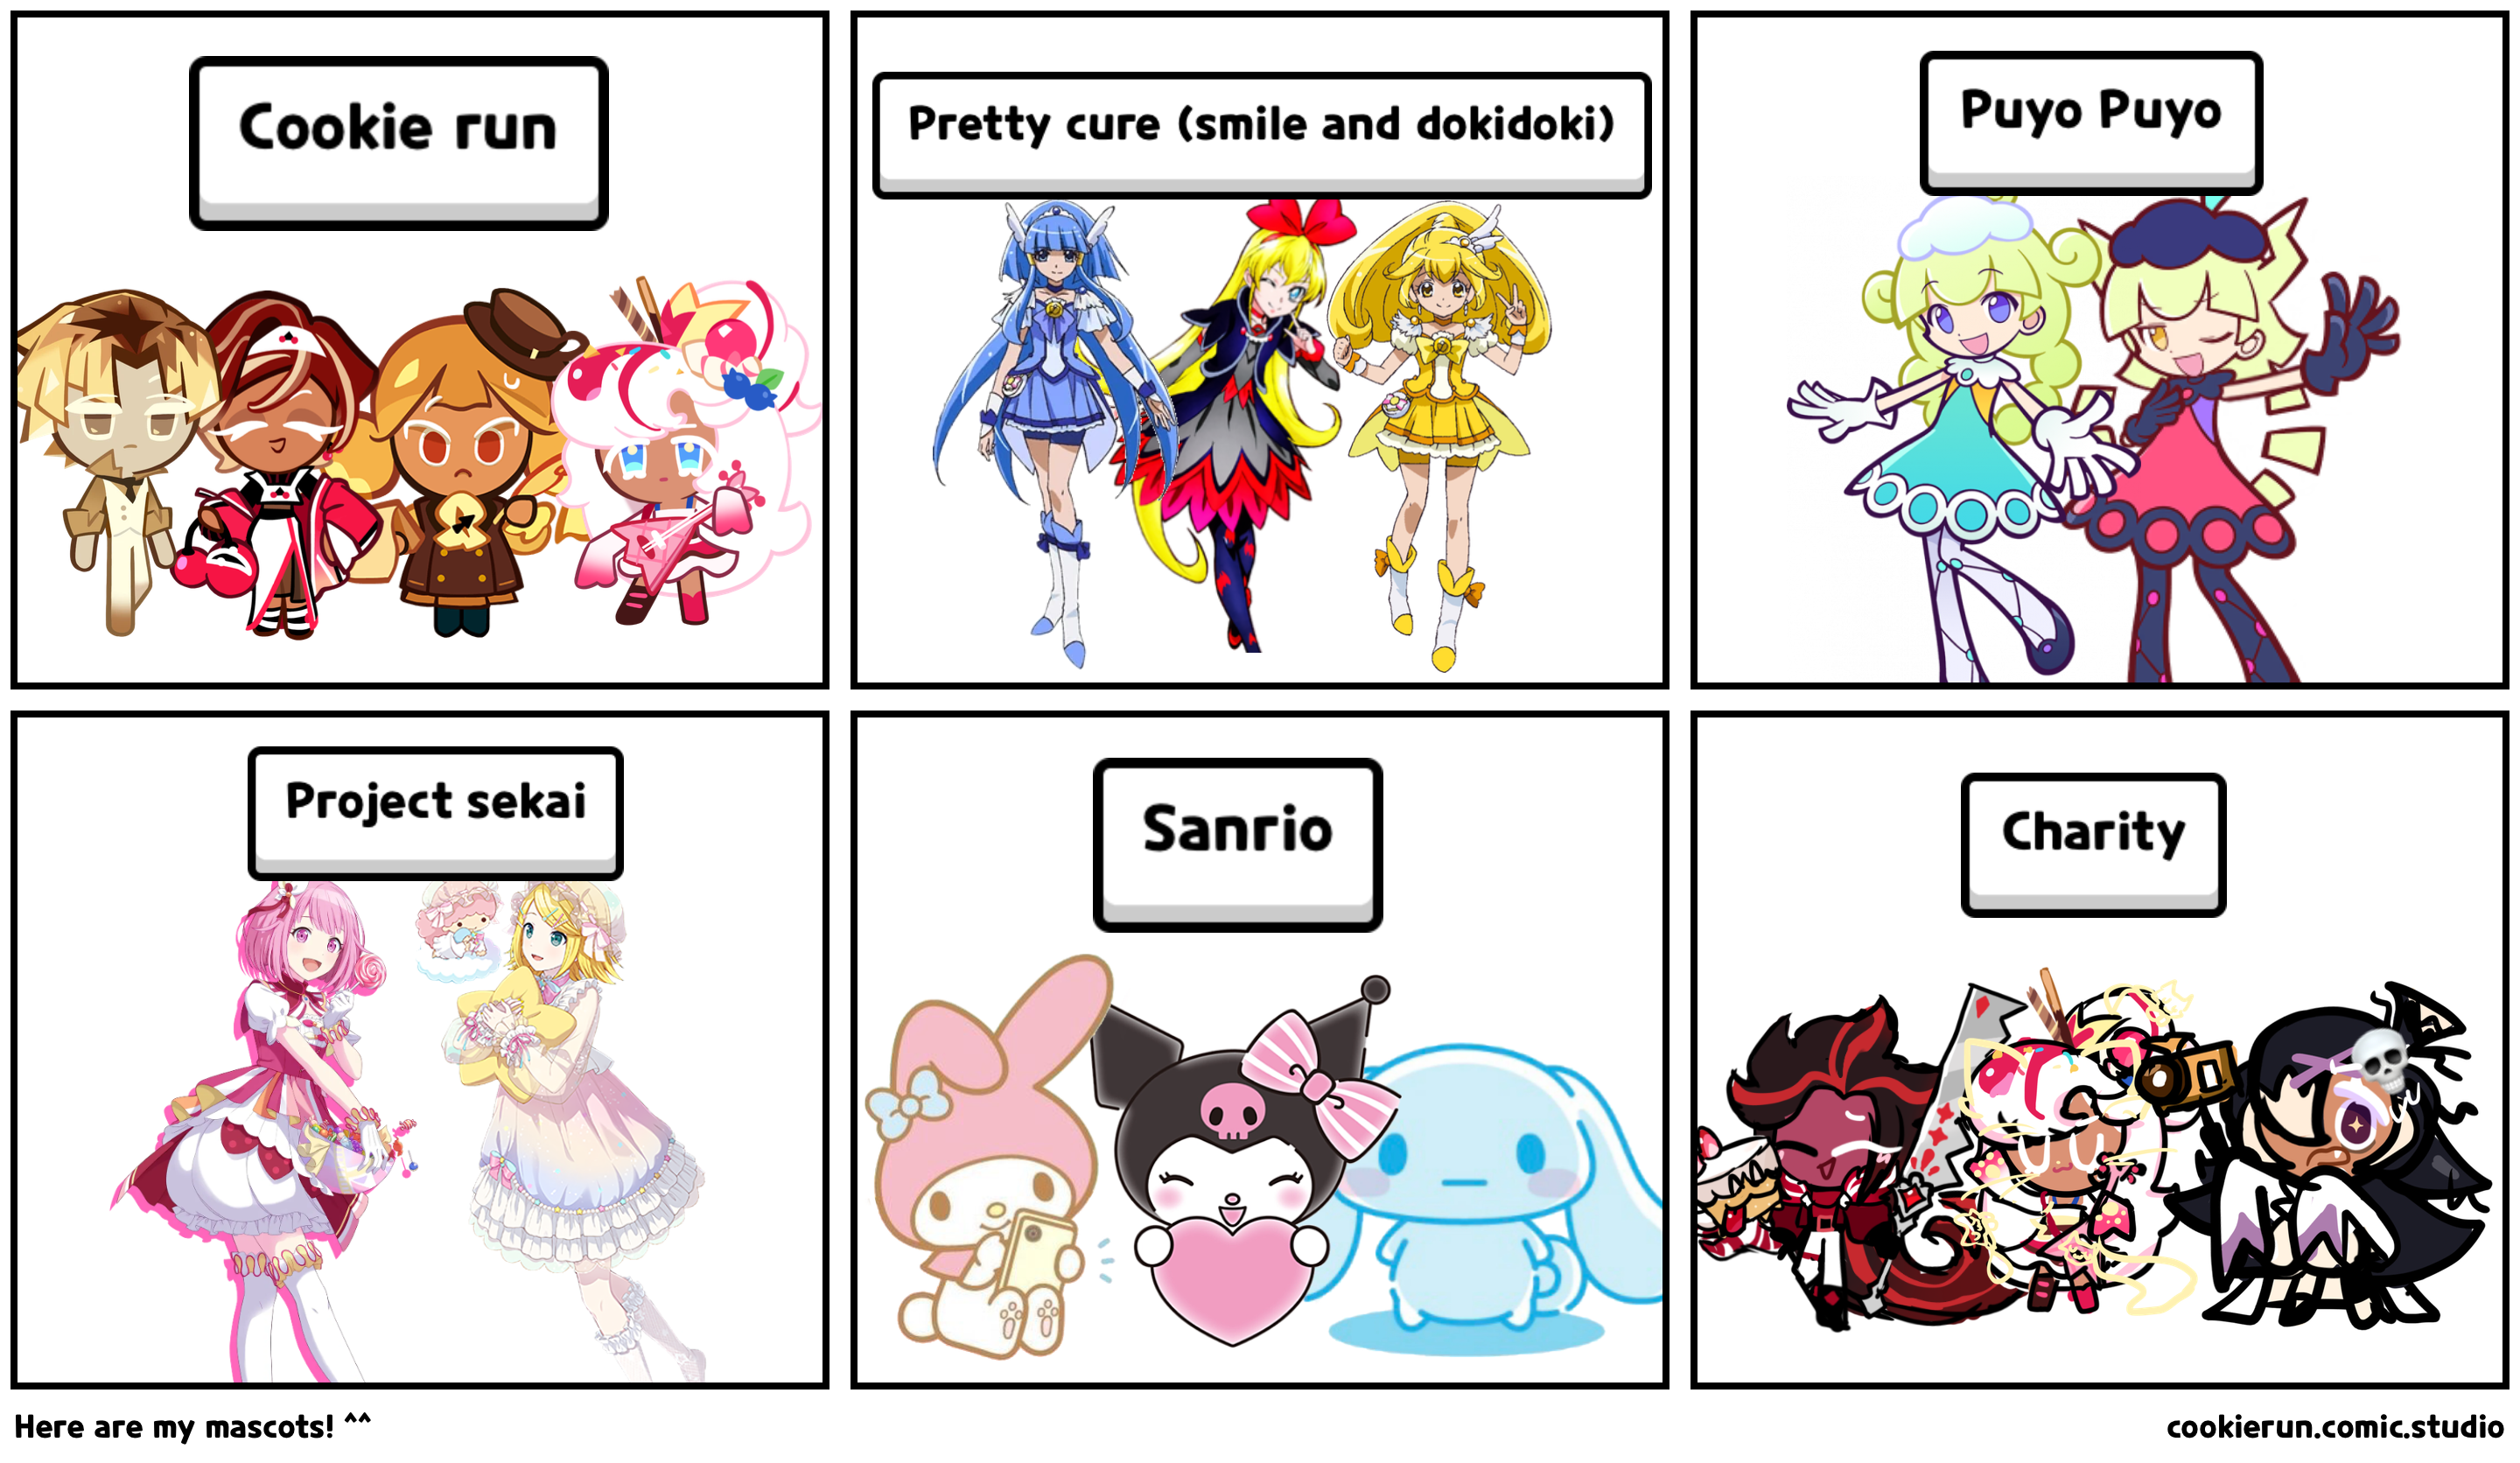 Here are my mascots! ^^